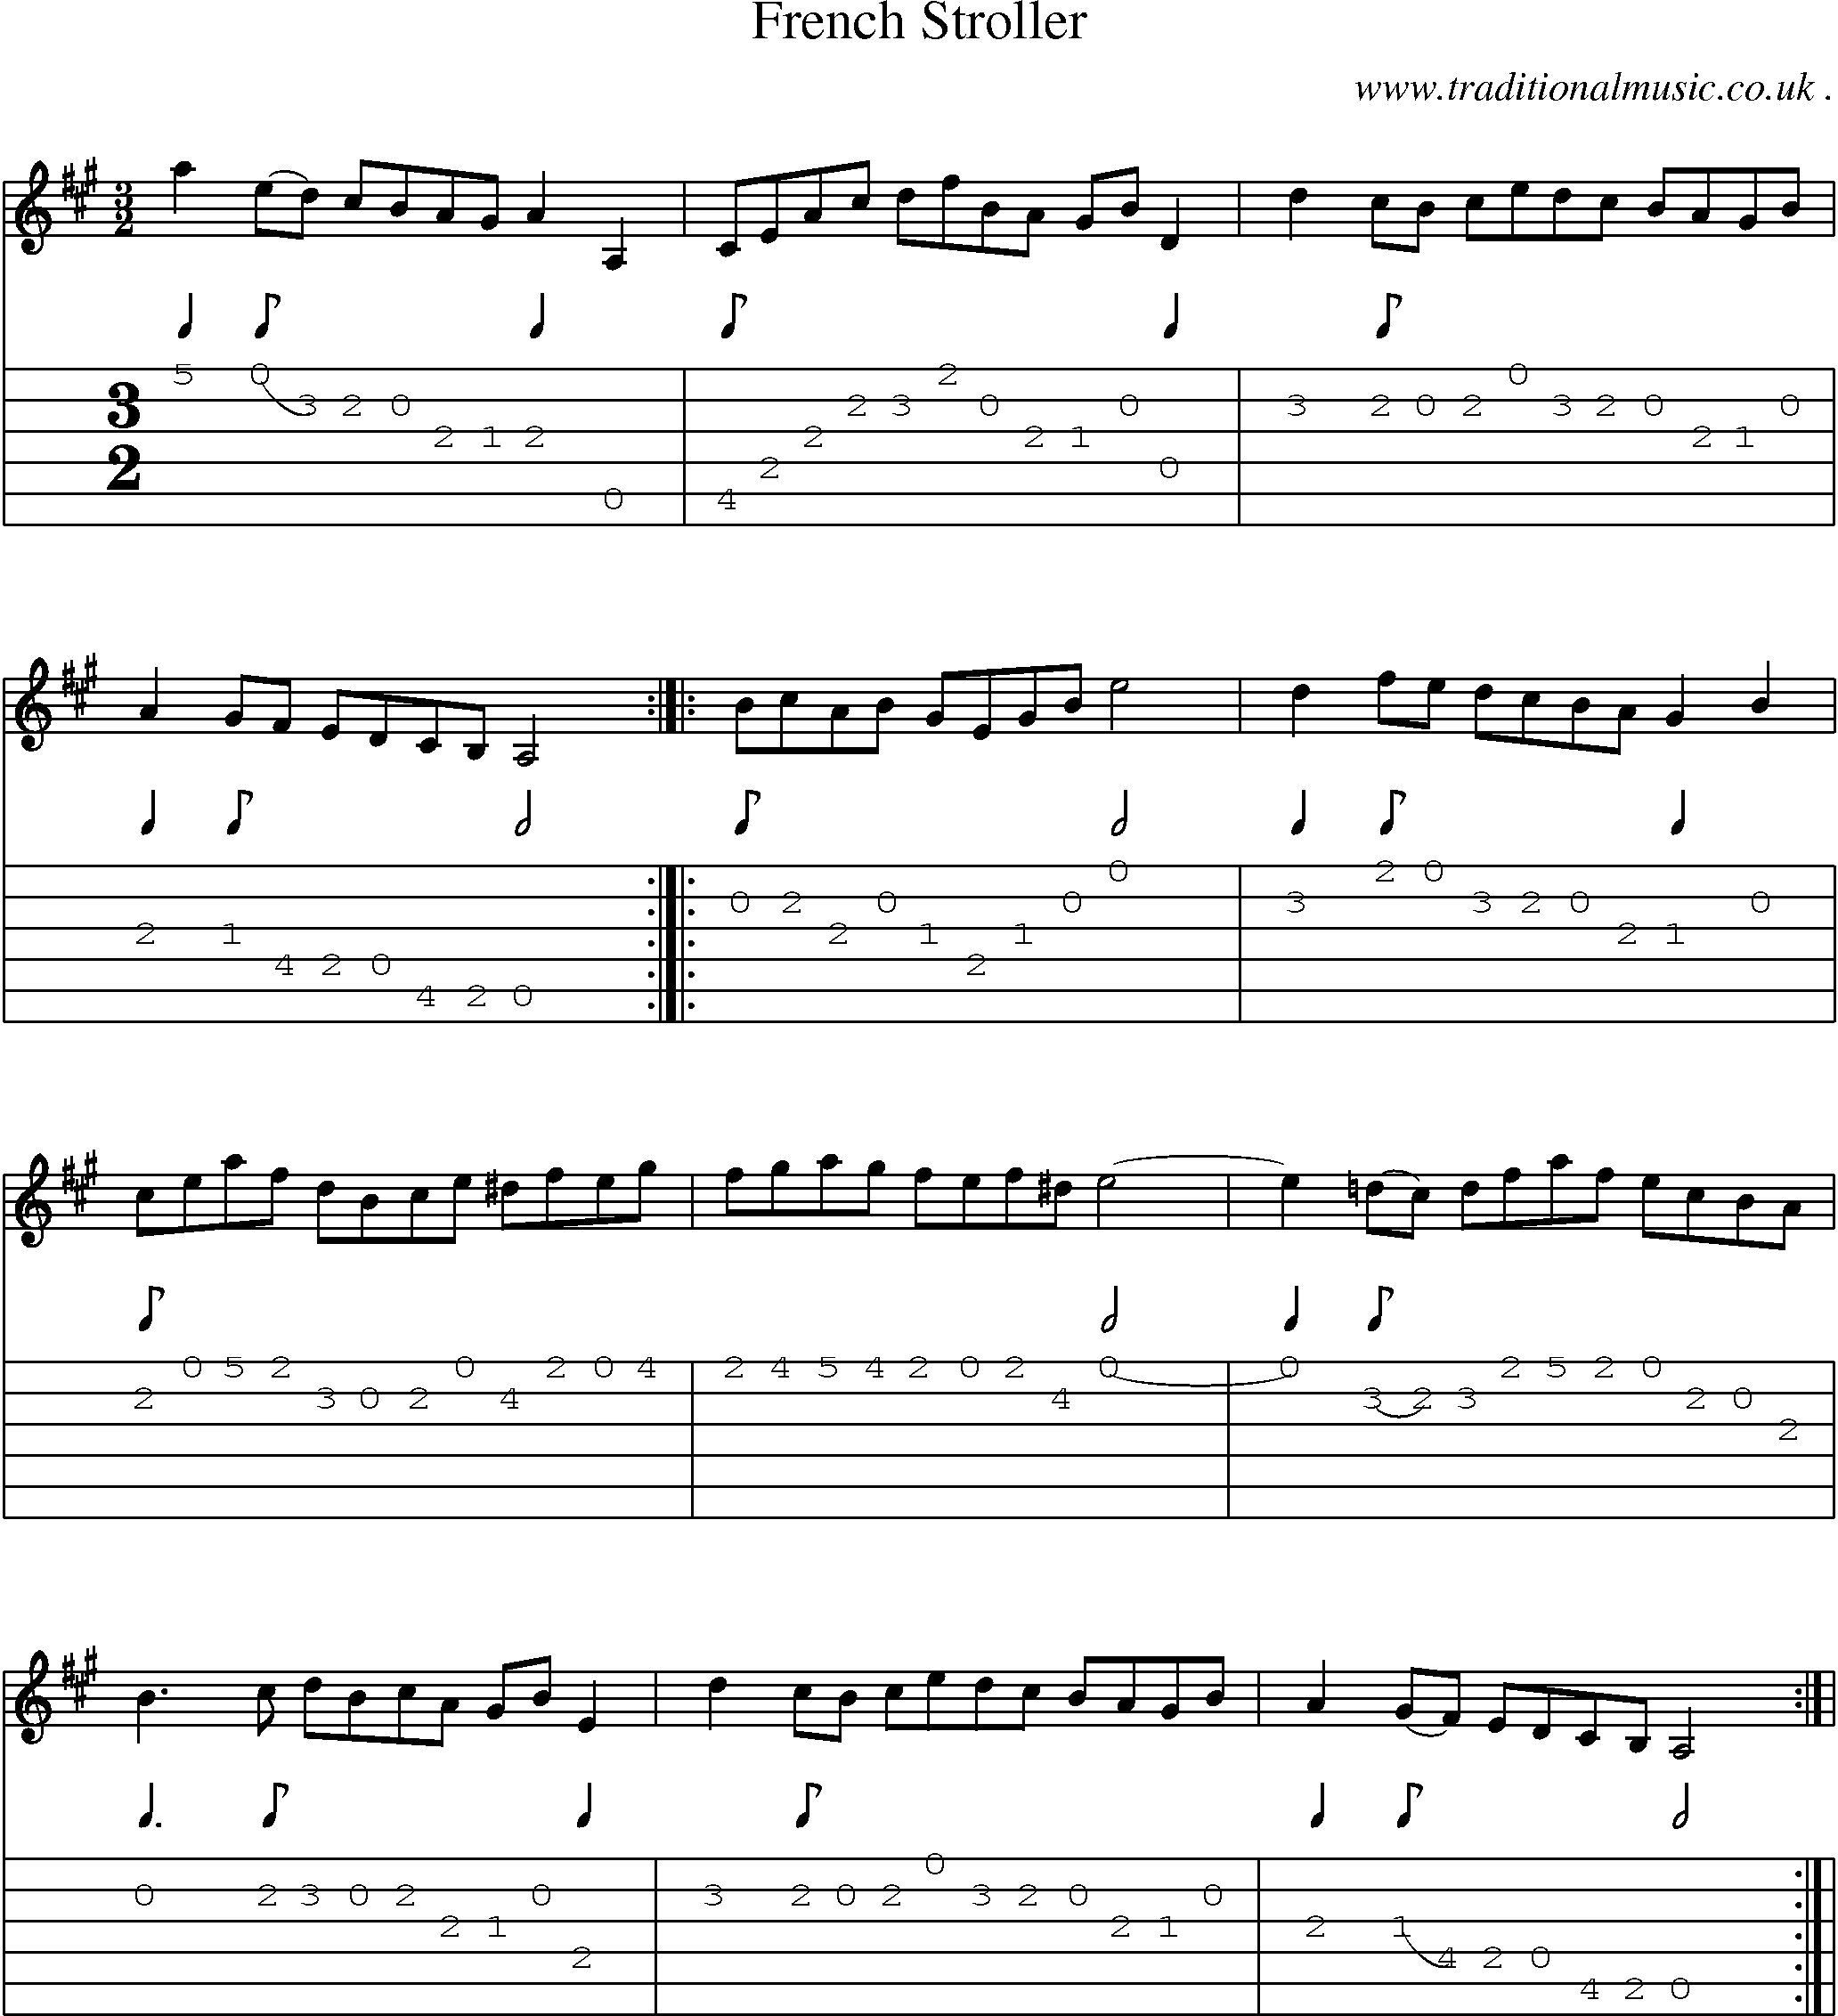 Sheet-Music and Guitar Tabs for French Stroller